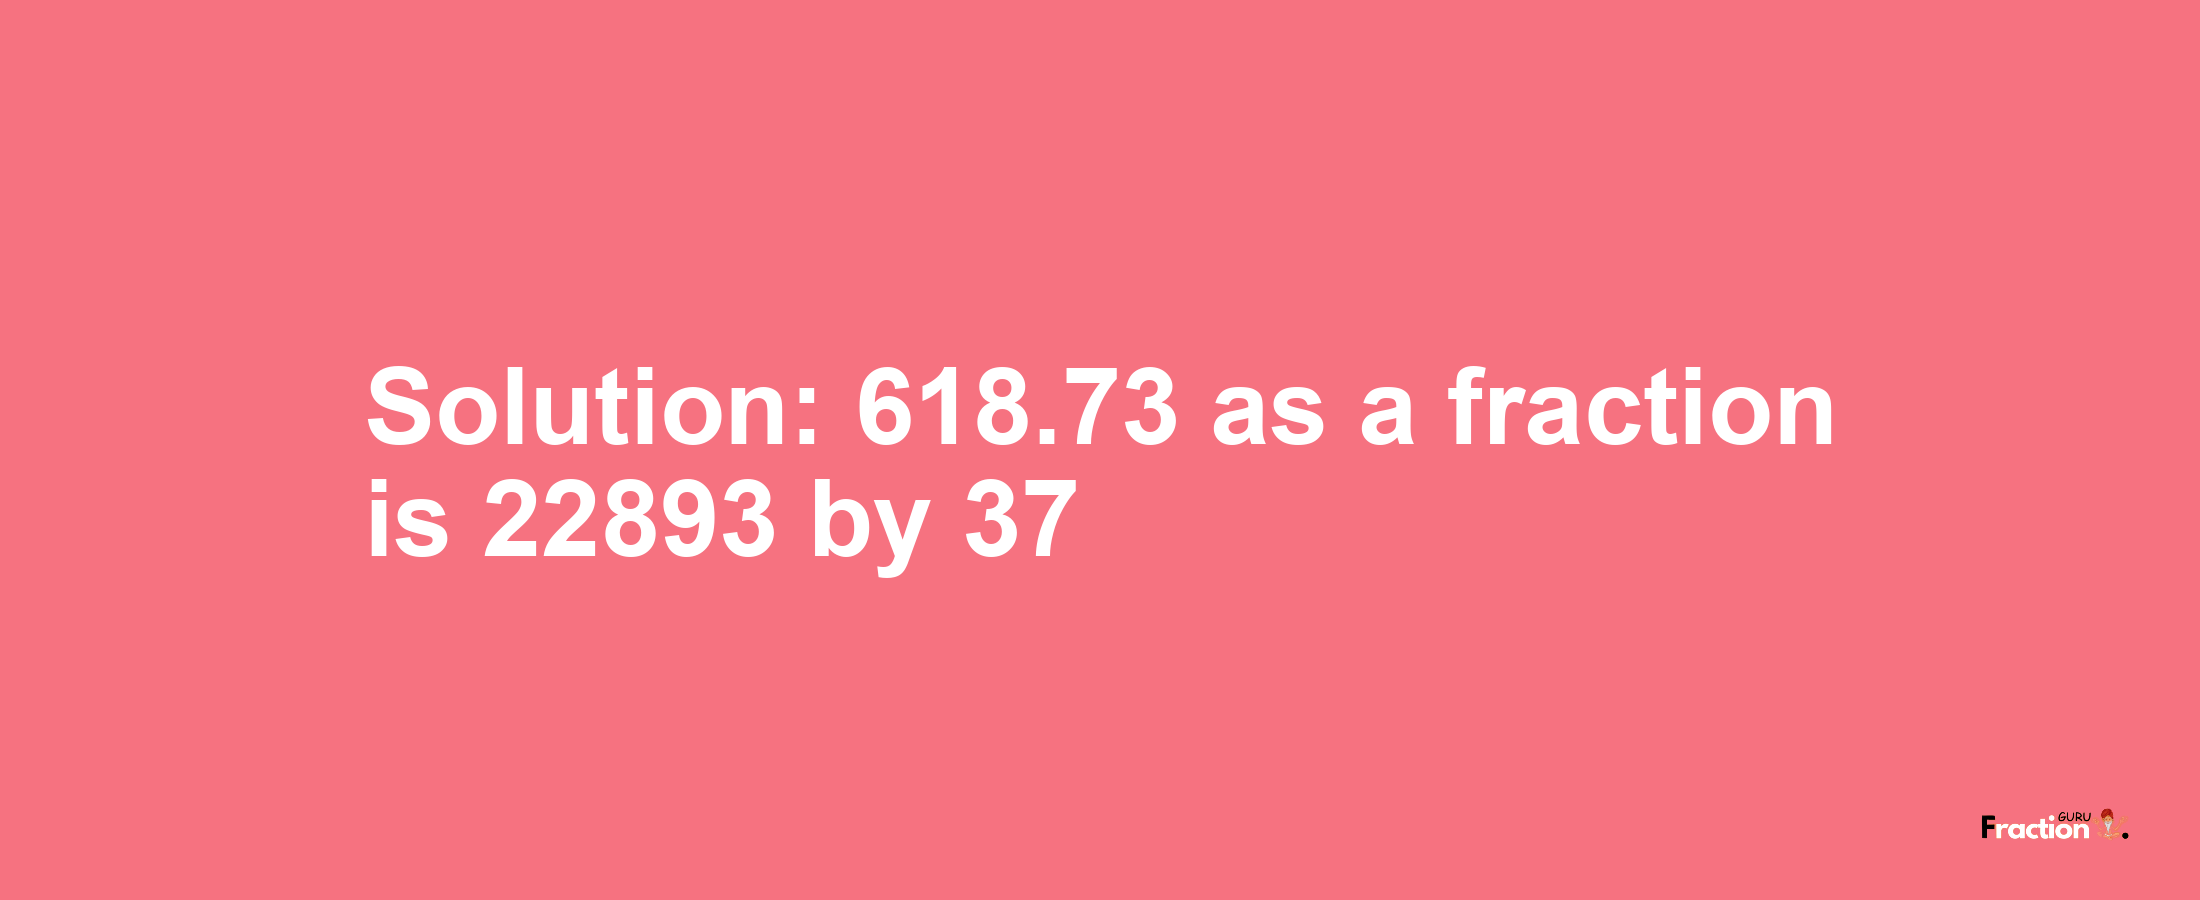 Solution:618.73 as a fraction is 22893/37